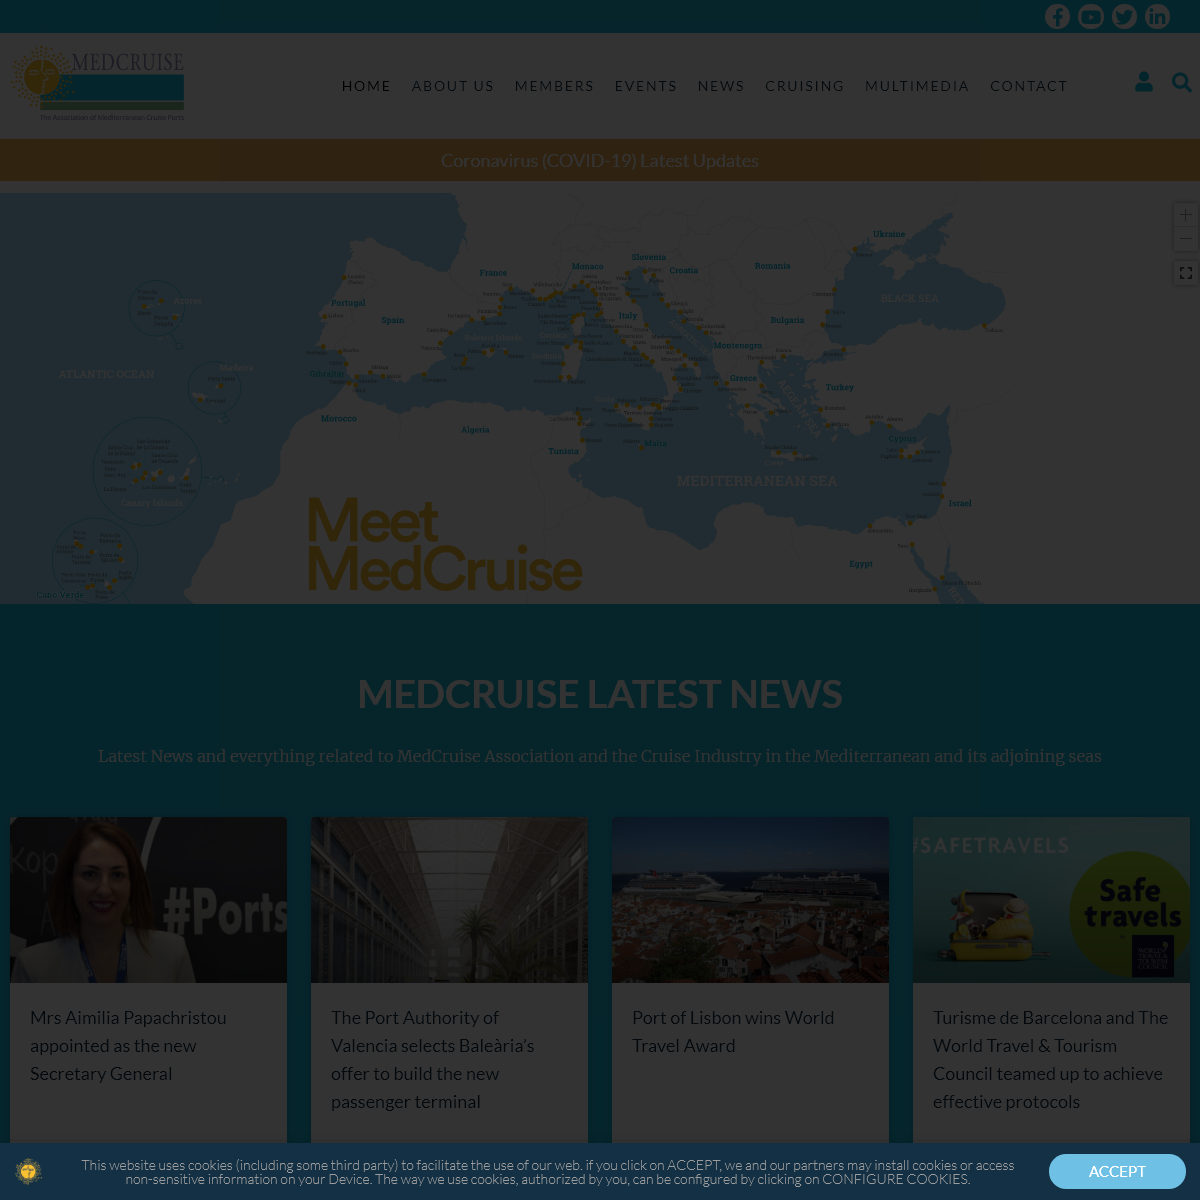 A complete backup of medcruise.com